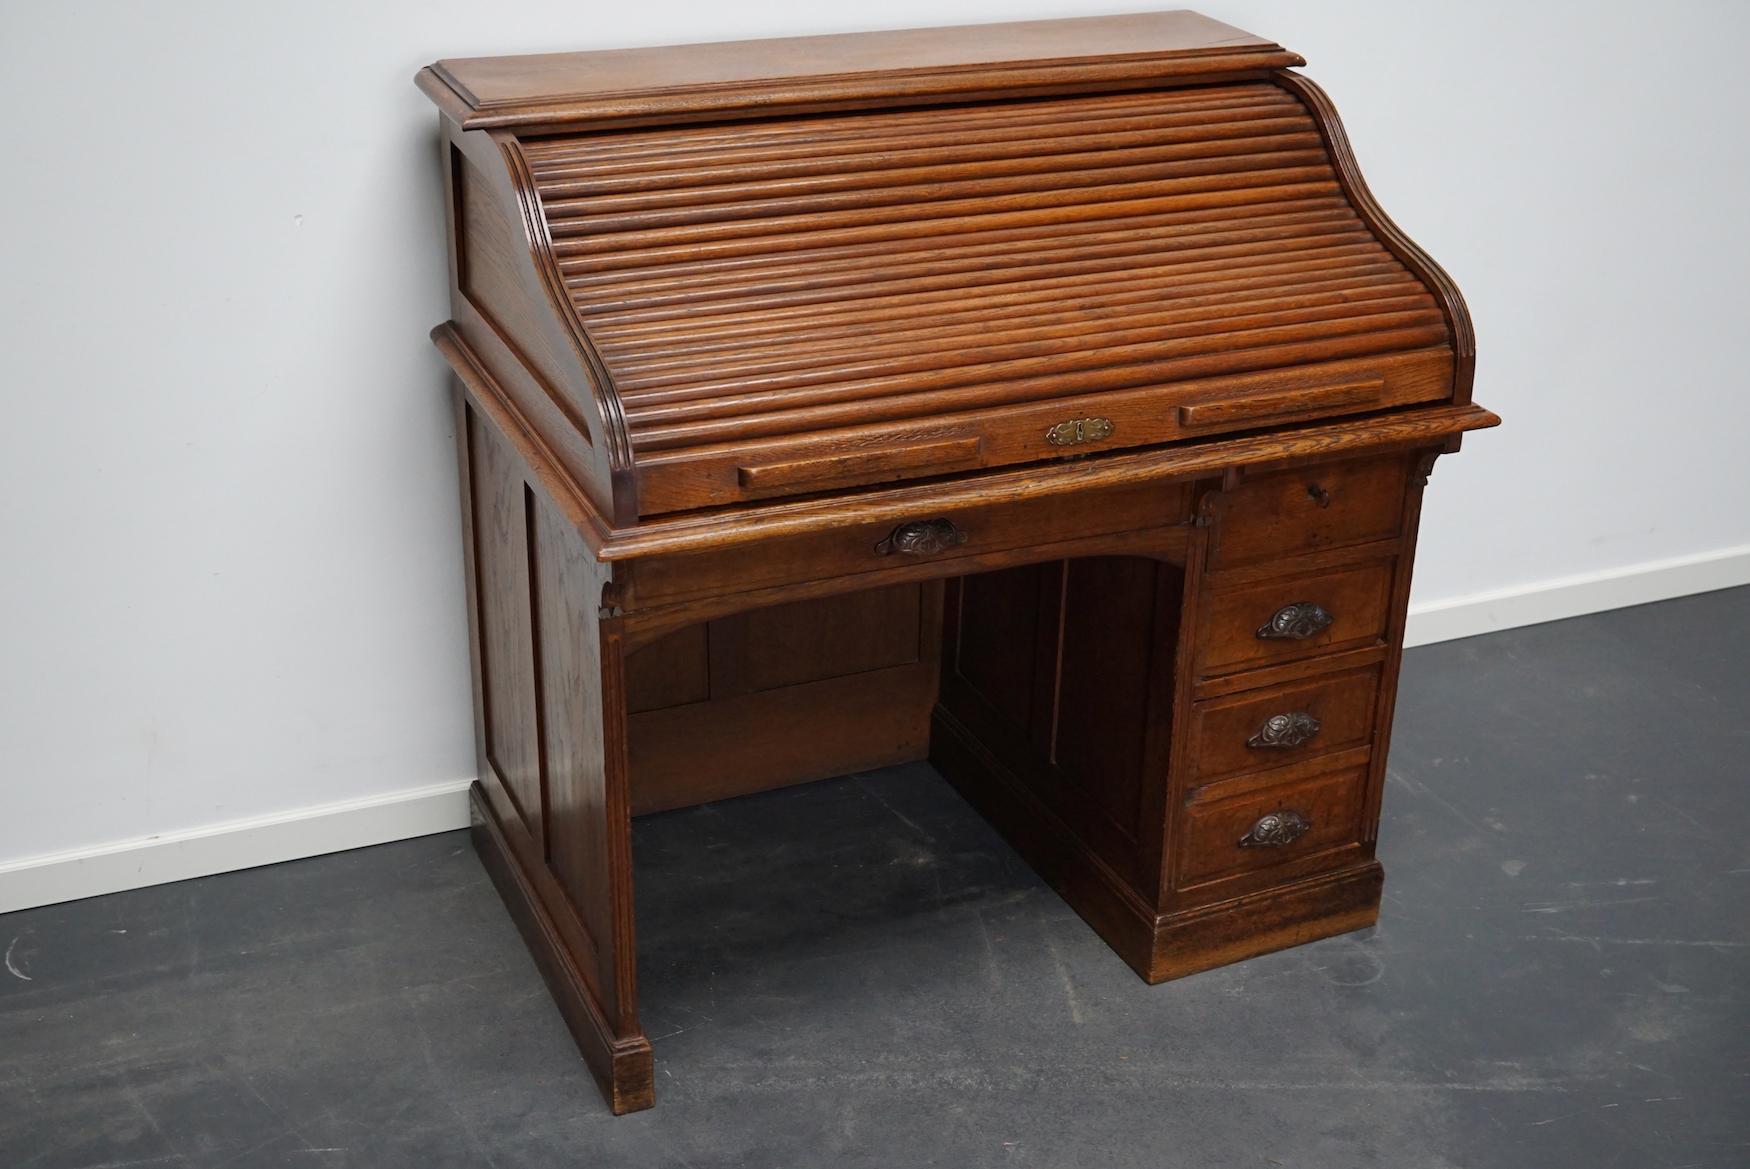 This desk was made around the late 19th century in France. It is made from solid oak with a roll top. It was used in Banque de France in the city Rouen. The desk retained a very nice patina over the years. The height to the worktop is 77 cm and the